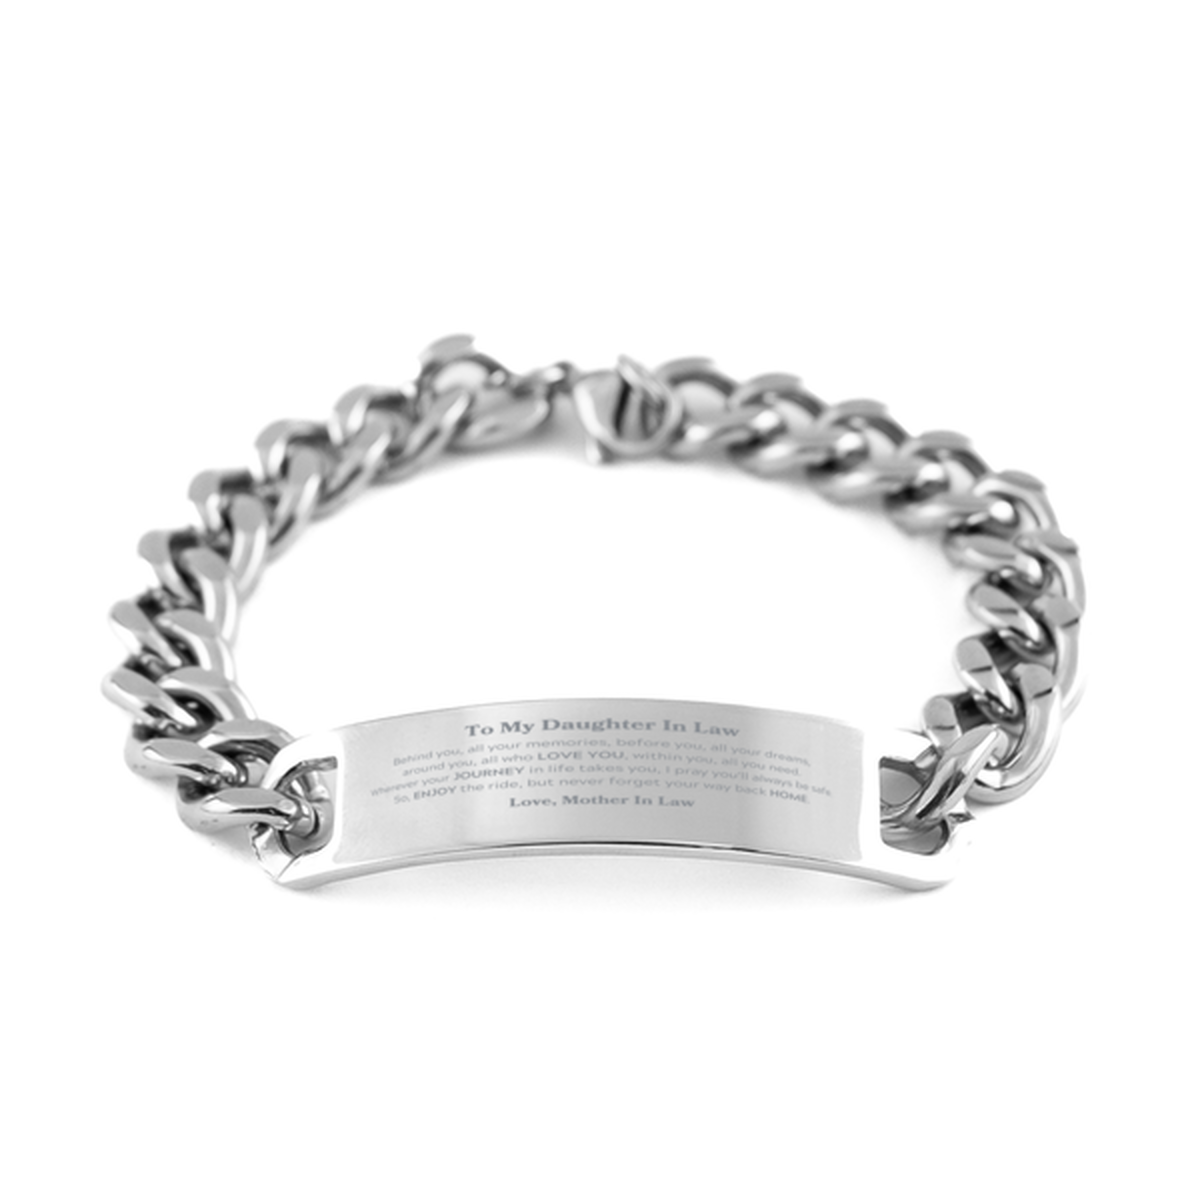 To My Daughter In Law Graduation Gifts from Mother In Law, Daughter In Law Cuban Chain Stainless Steel Bracelet Christmas Birthday Gifts for Daughter In Law Behind you, all your memories, before you, all your dreams. Love, Mother In Law